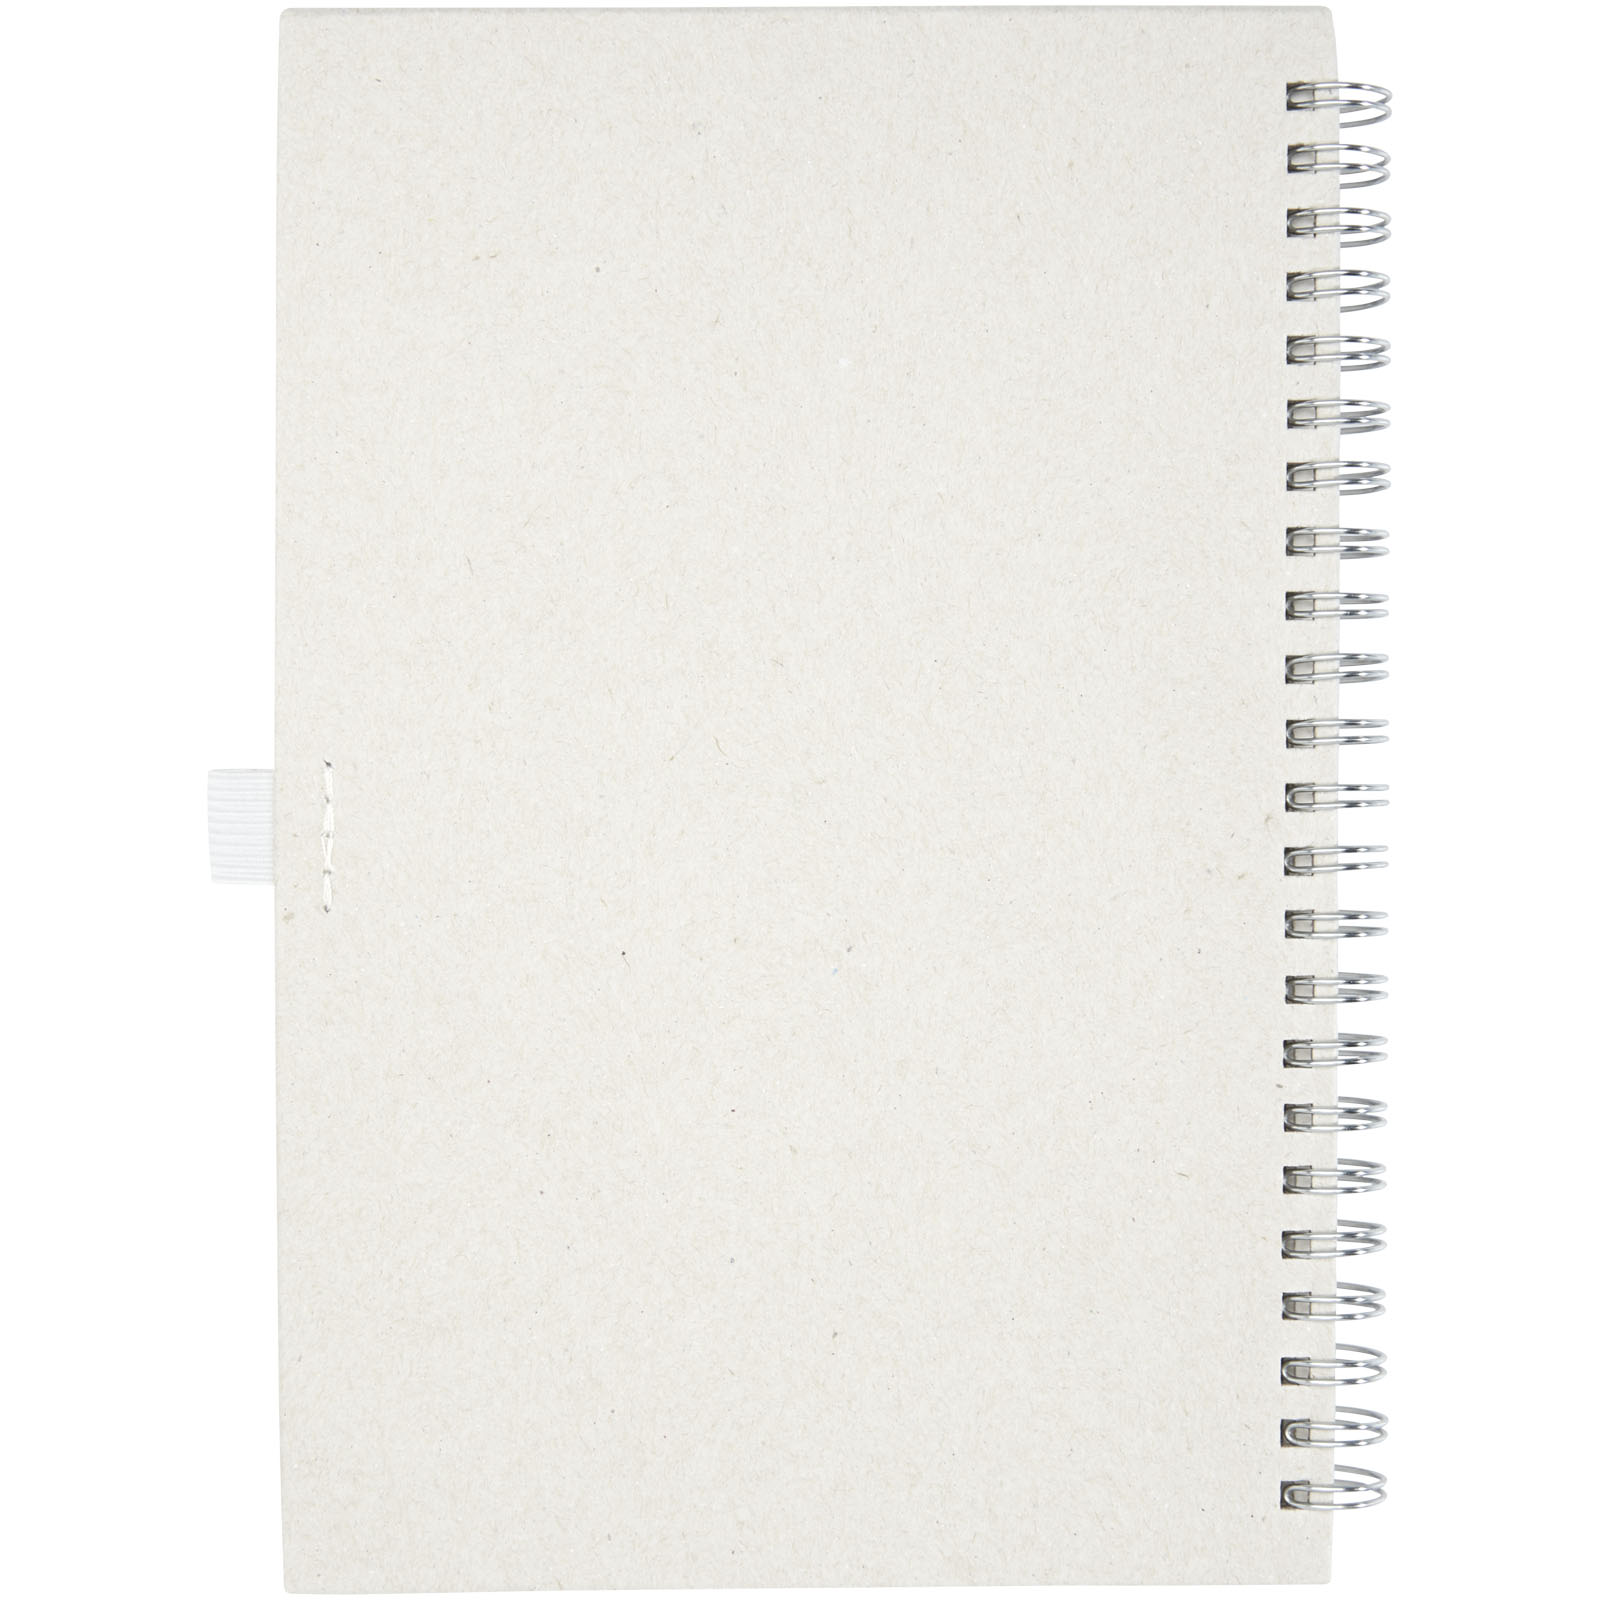 Advertising Hard cover notebooks - Dairy Dream A5 size reference recycled milk cartons spiral notebook - 2